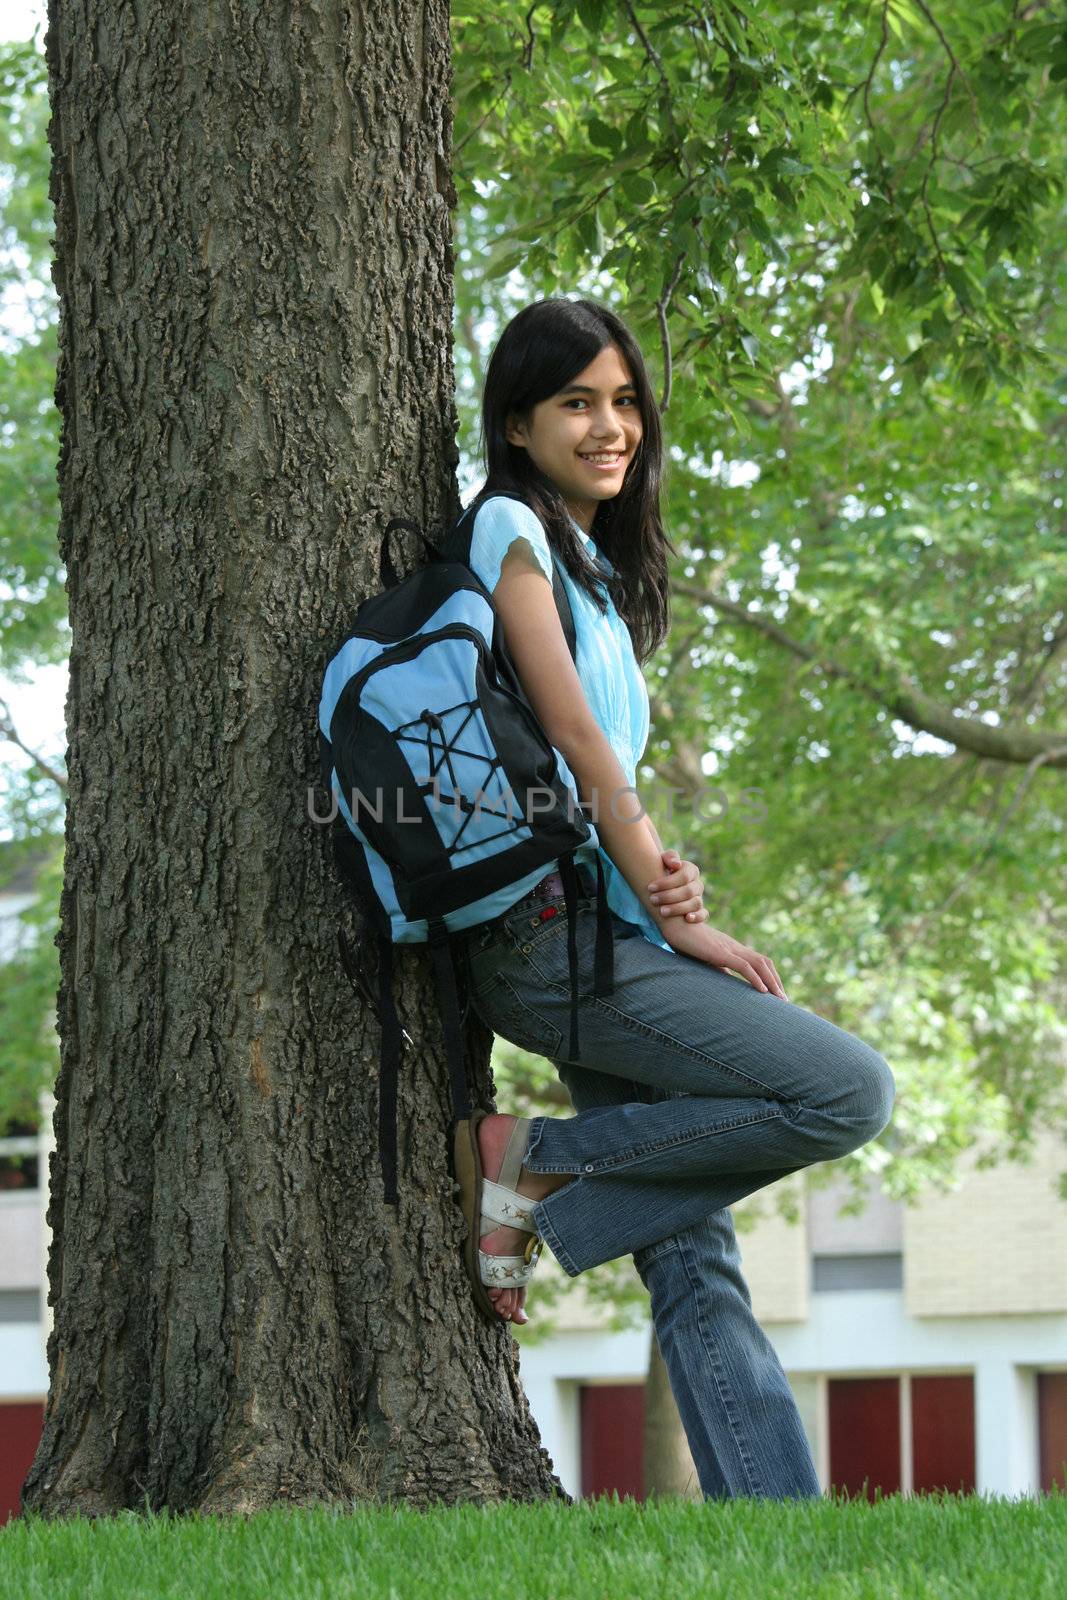 Young teen girl standing with backpack by tree, by jarenwicklund